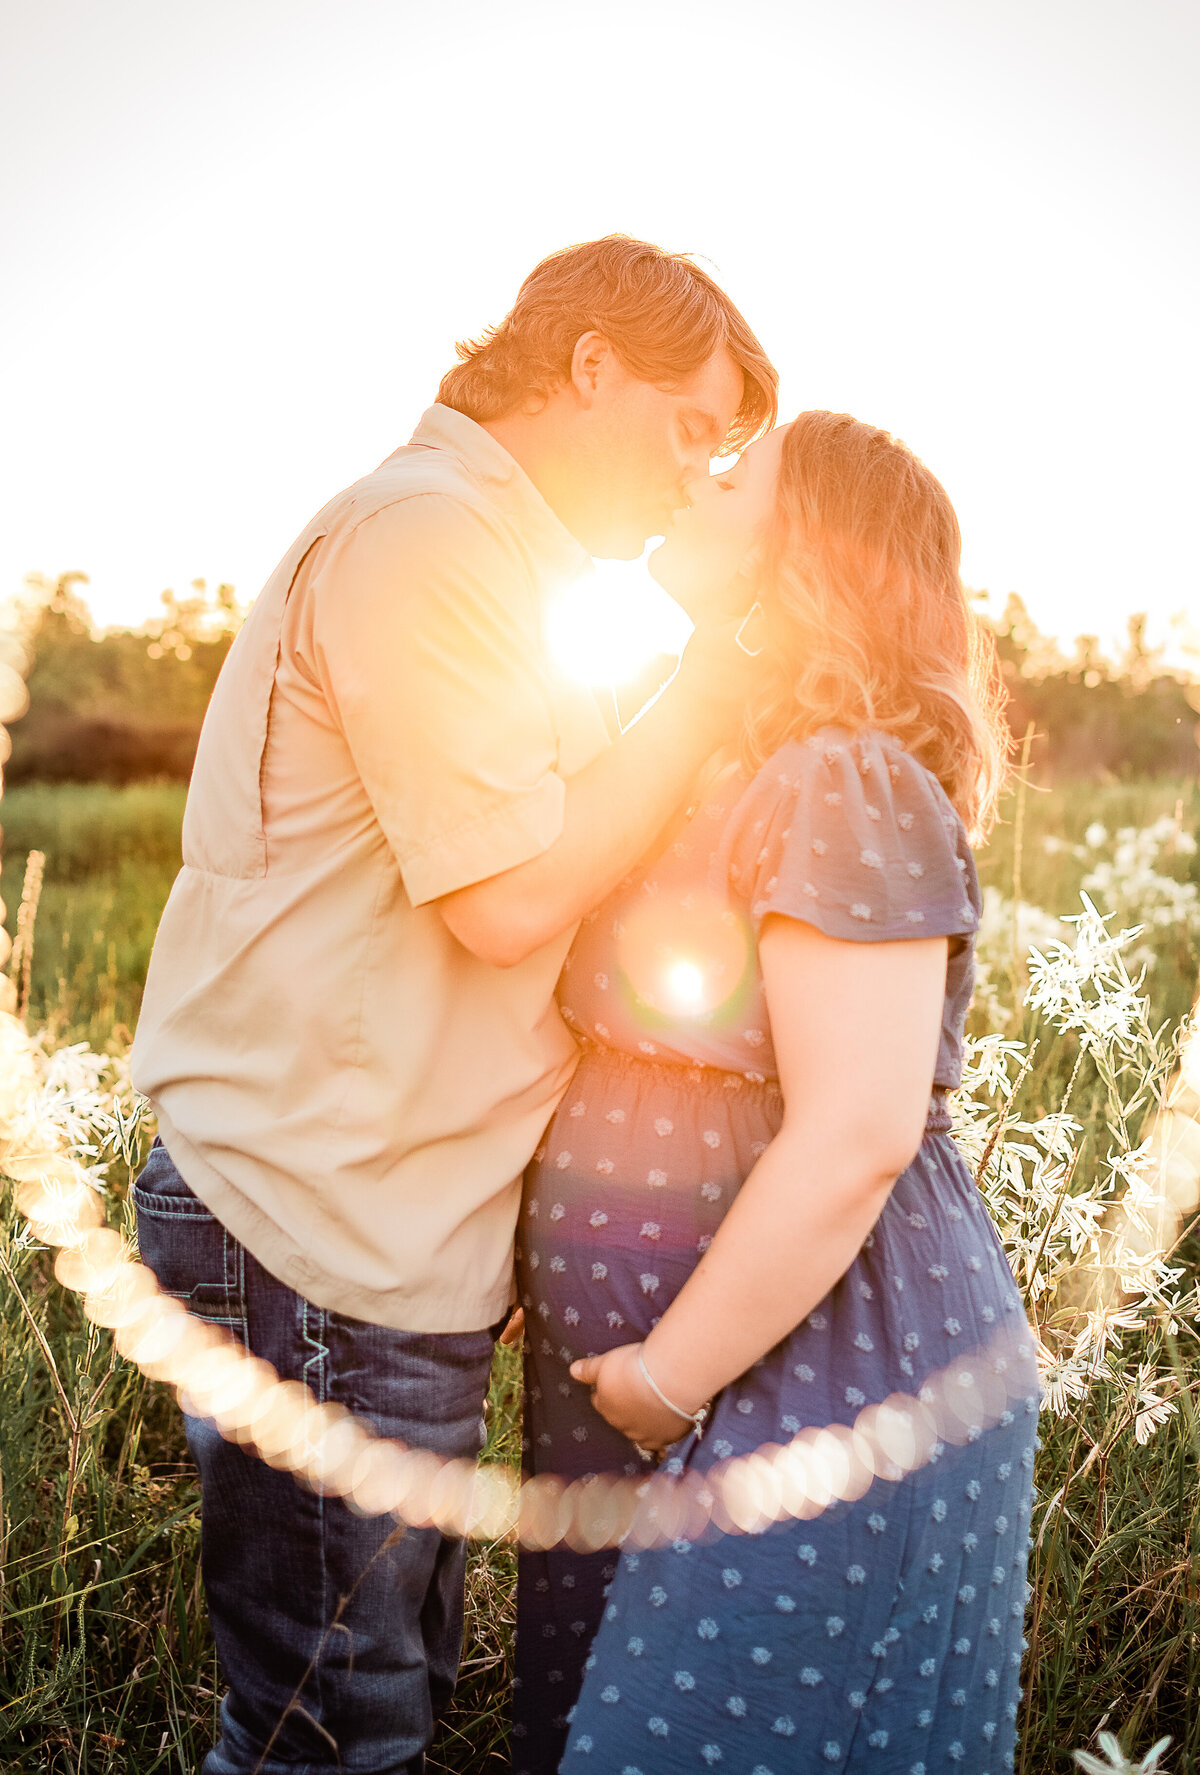 A married couple kiss as the sun shines brightly behind them.